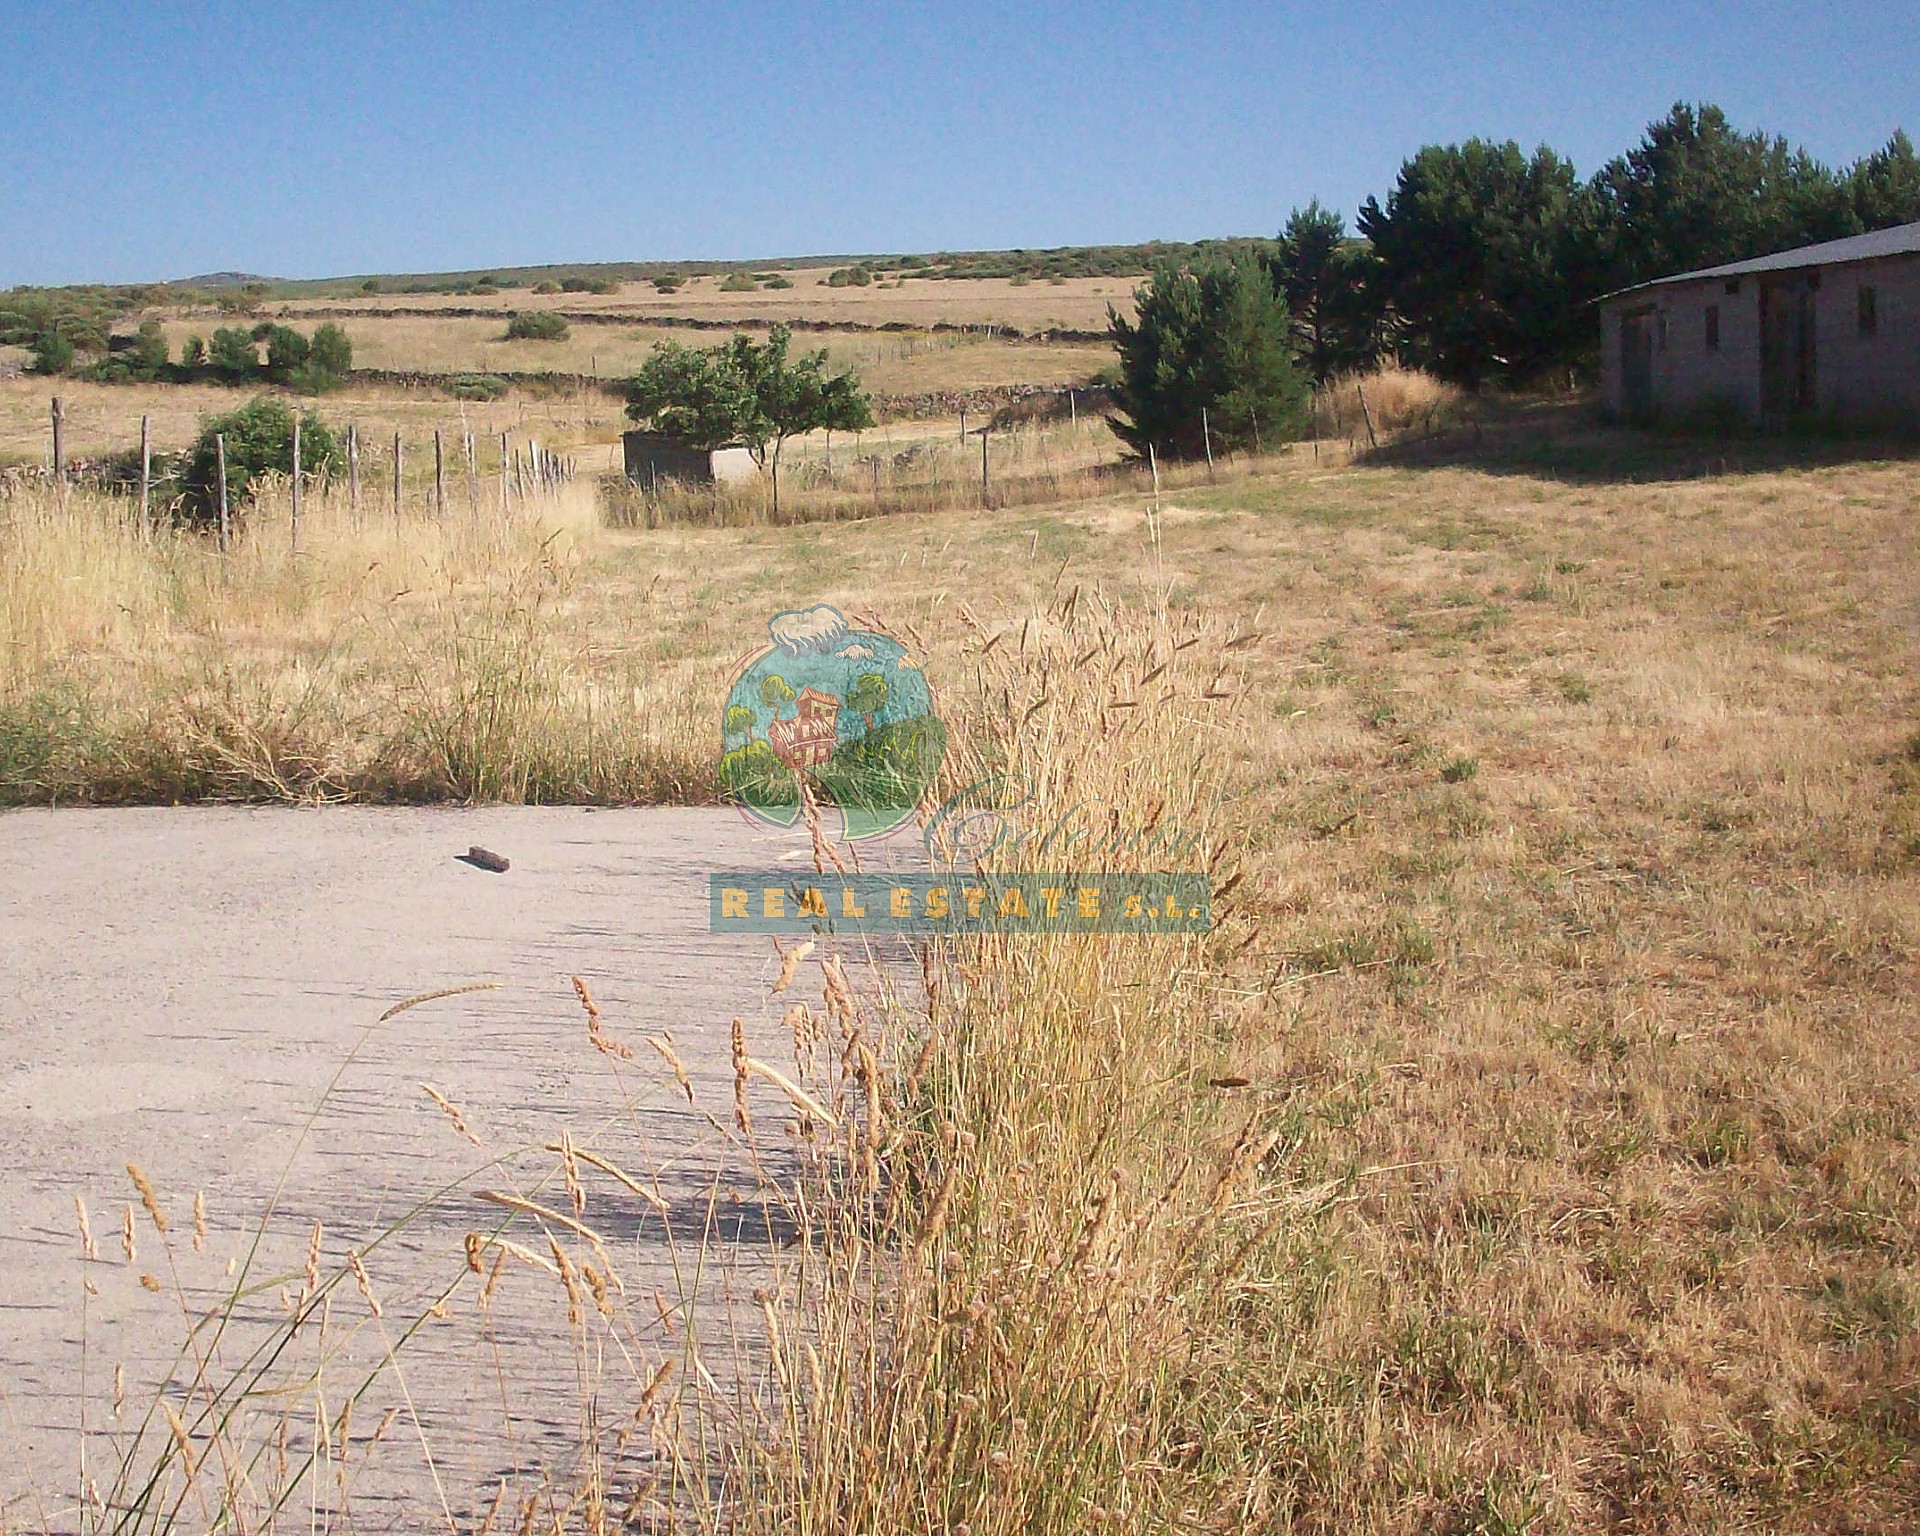 Land fit for social or farming projects in Sierra de Gredos.